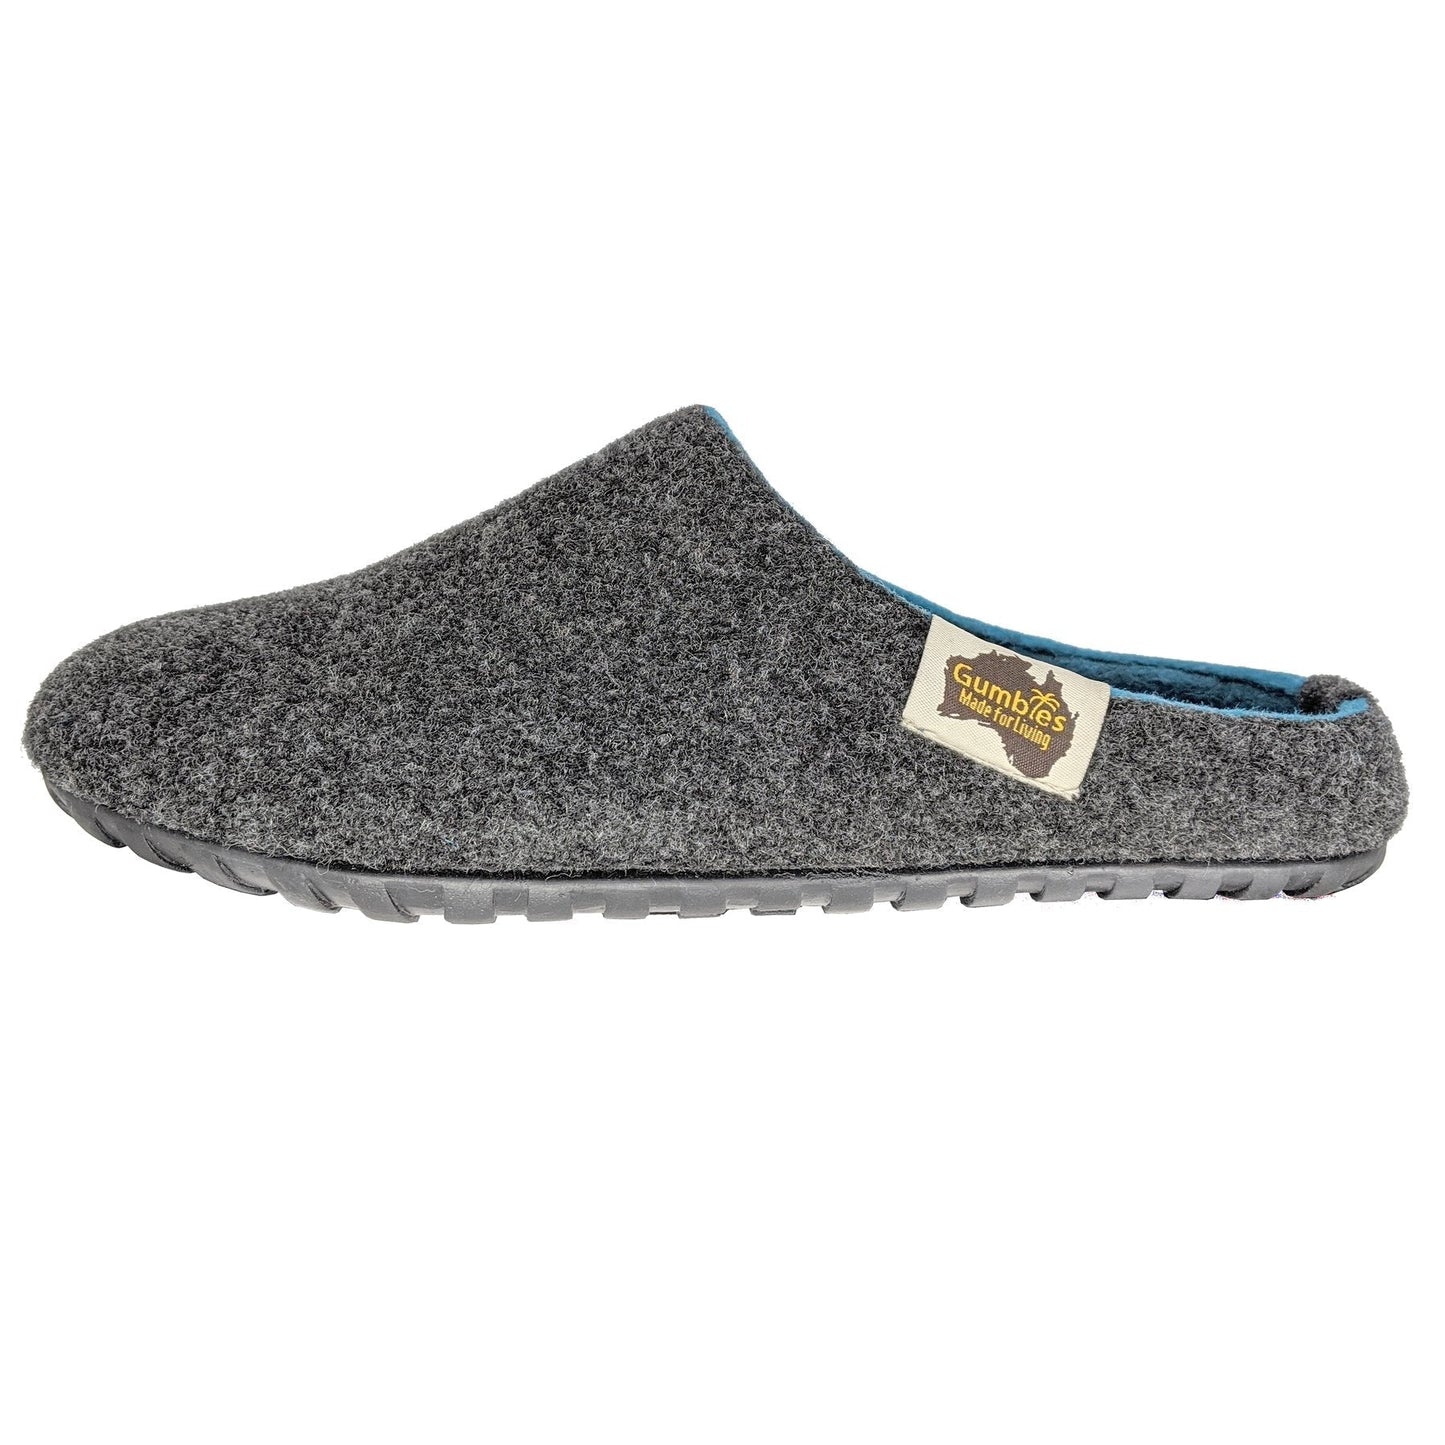 Outback Slipper - Charcoal & Turquoise